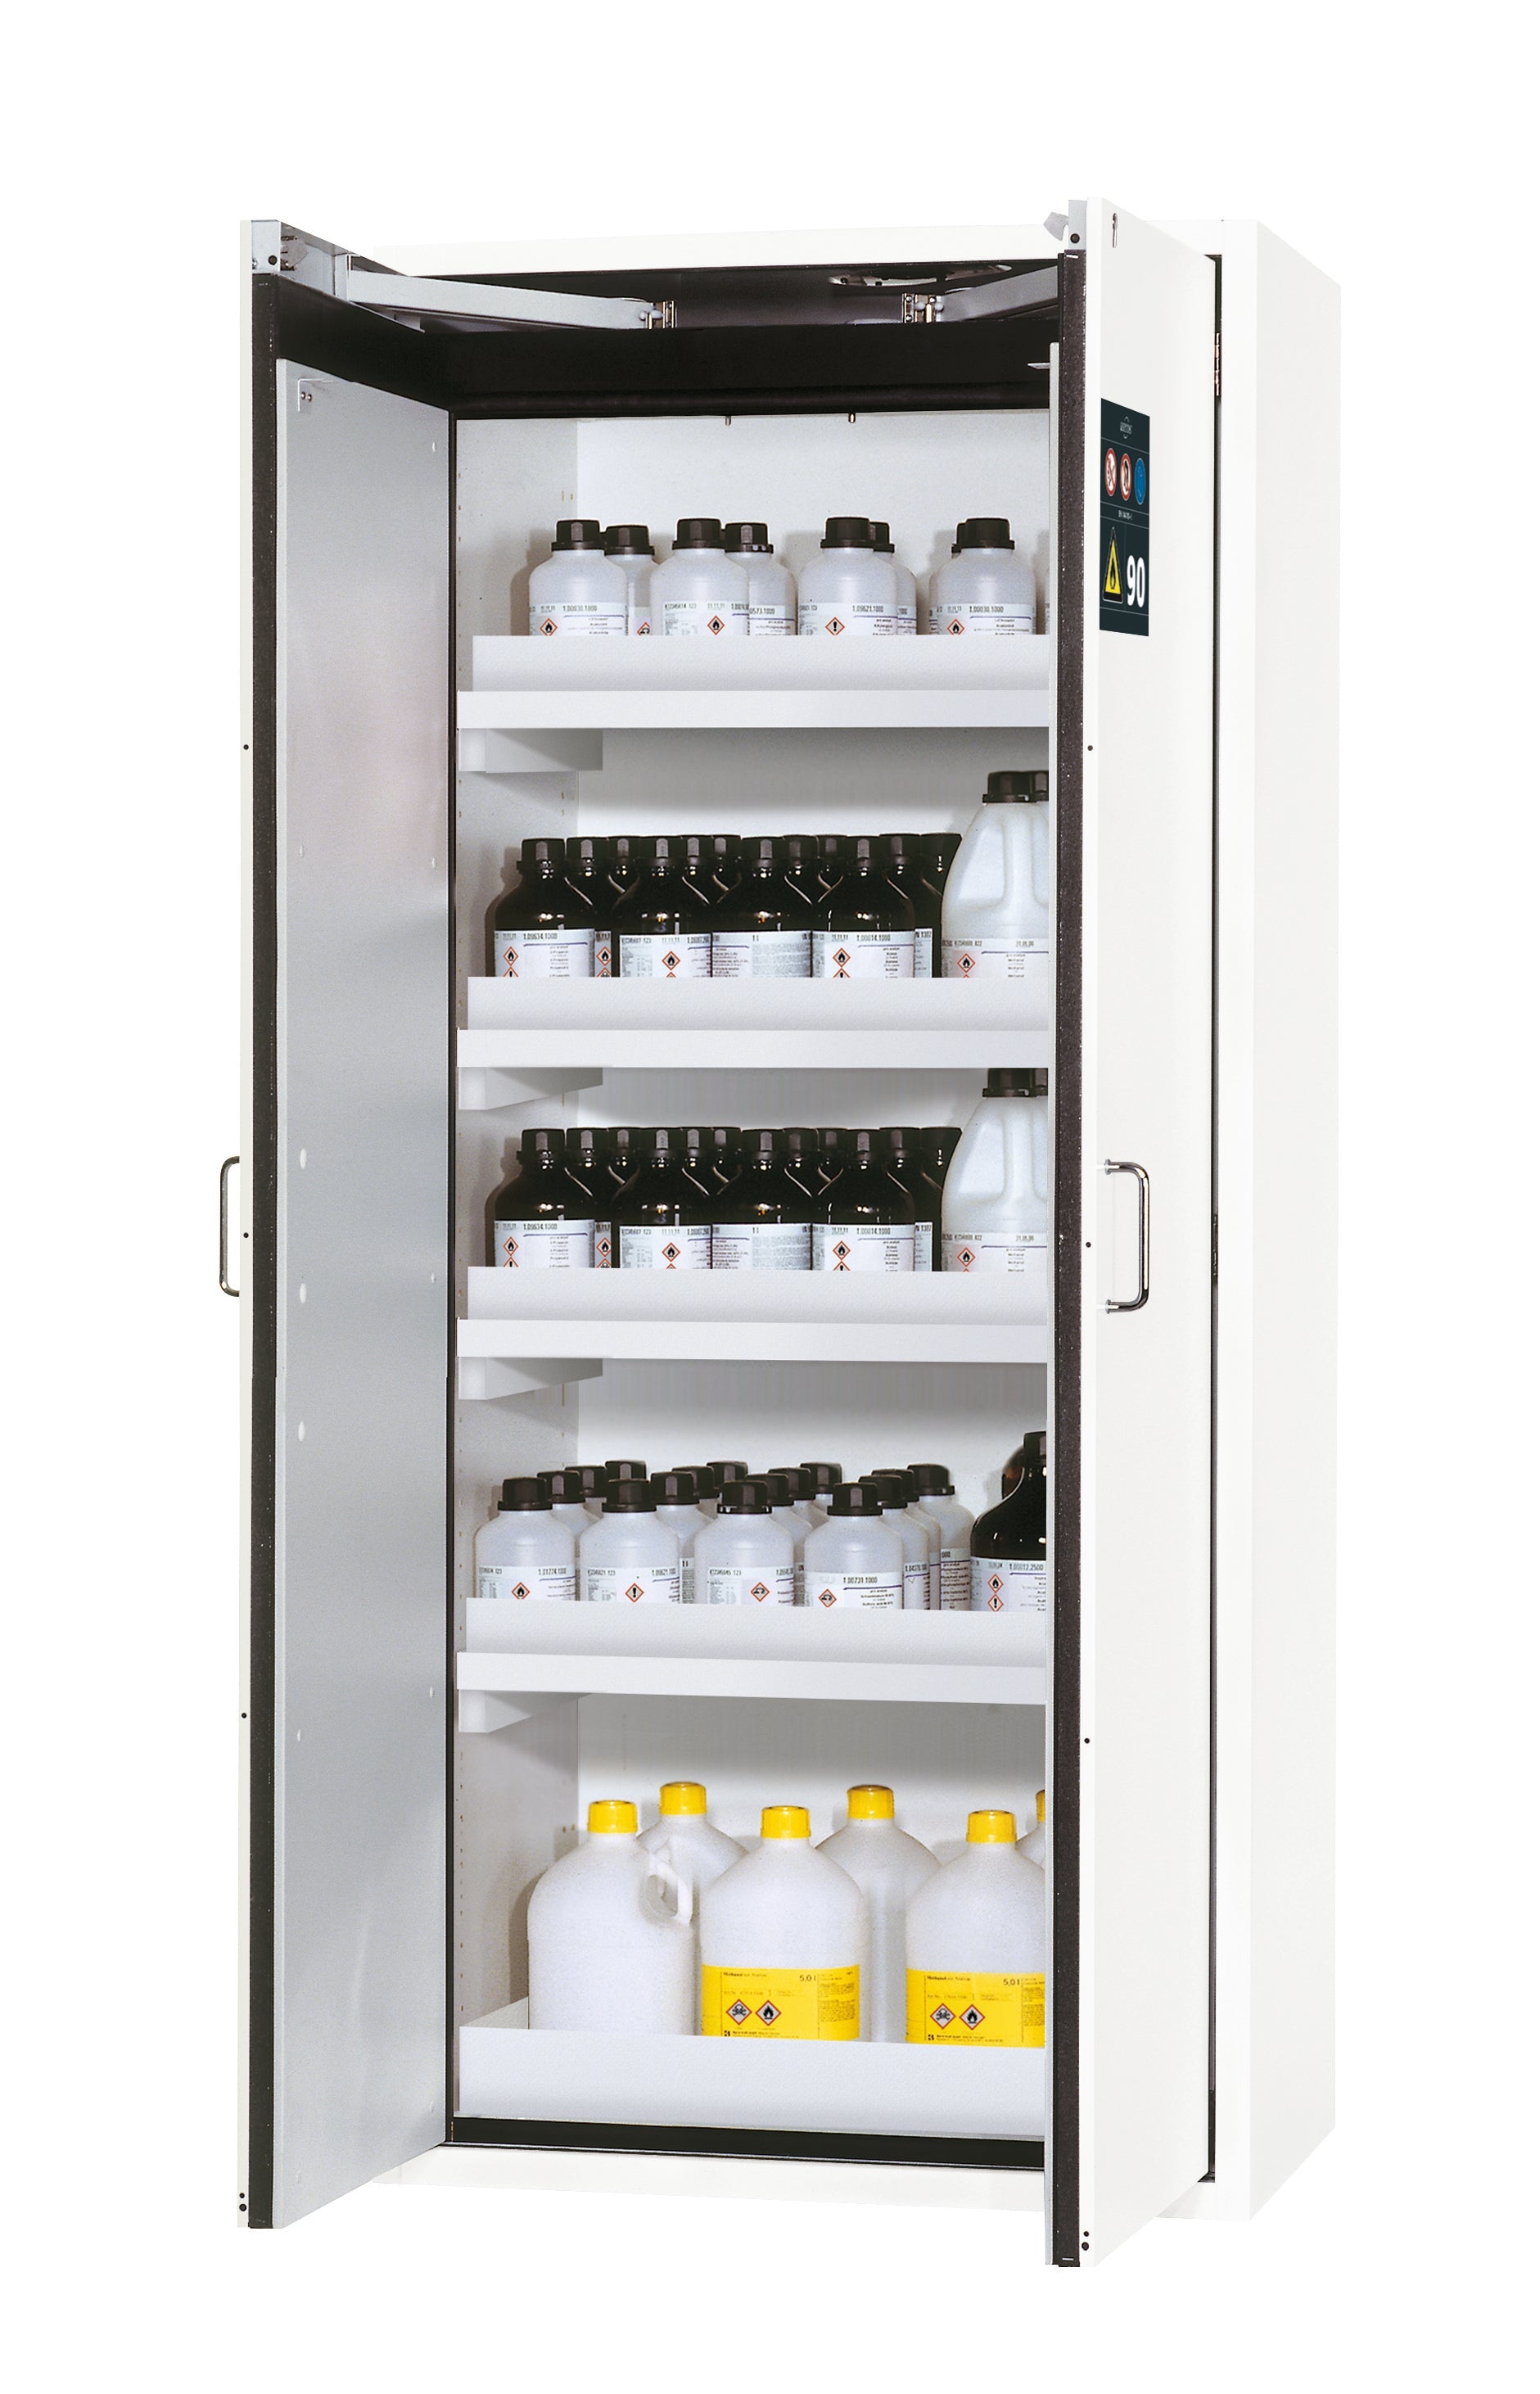 Type 90 safety cabinet S-CLASSIC-90 model S90.196.090.WDAS in laboratory white (similar to RAL 9016) with 4x standard tray base (polypropylene)